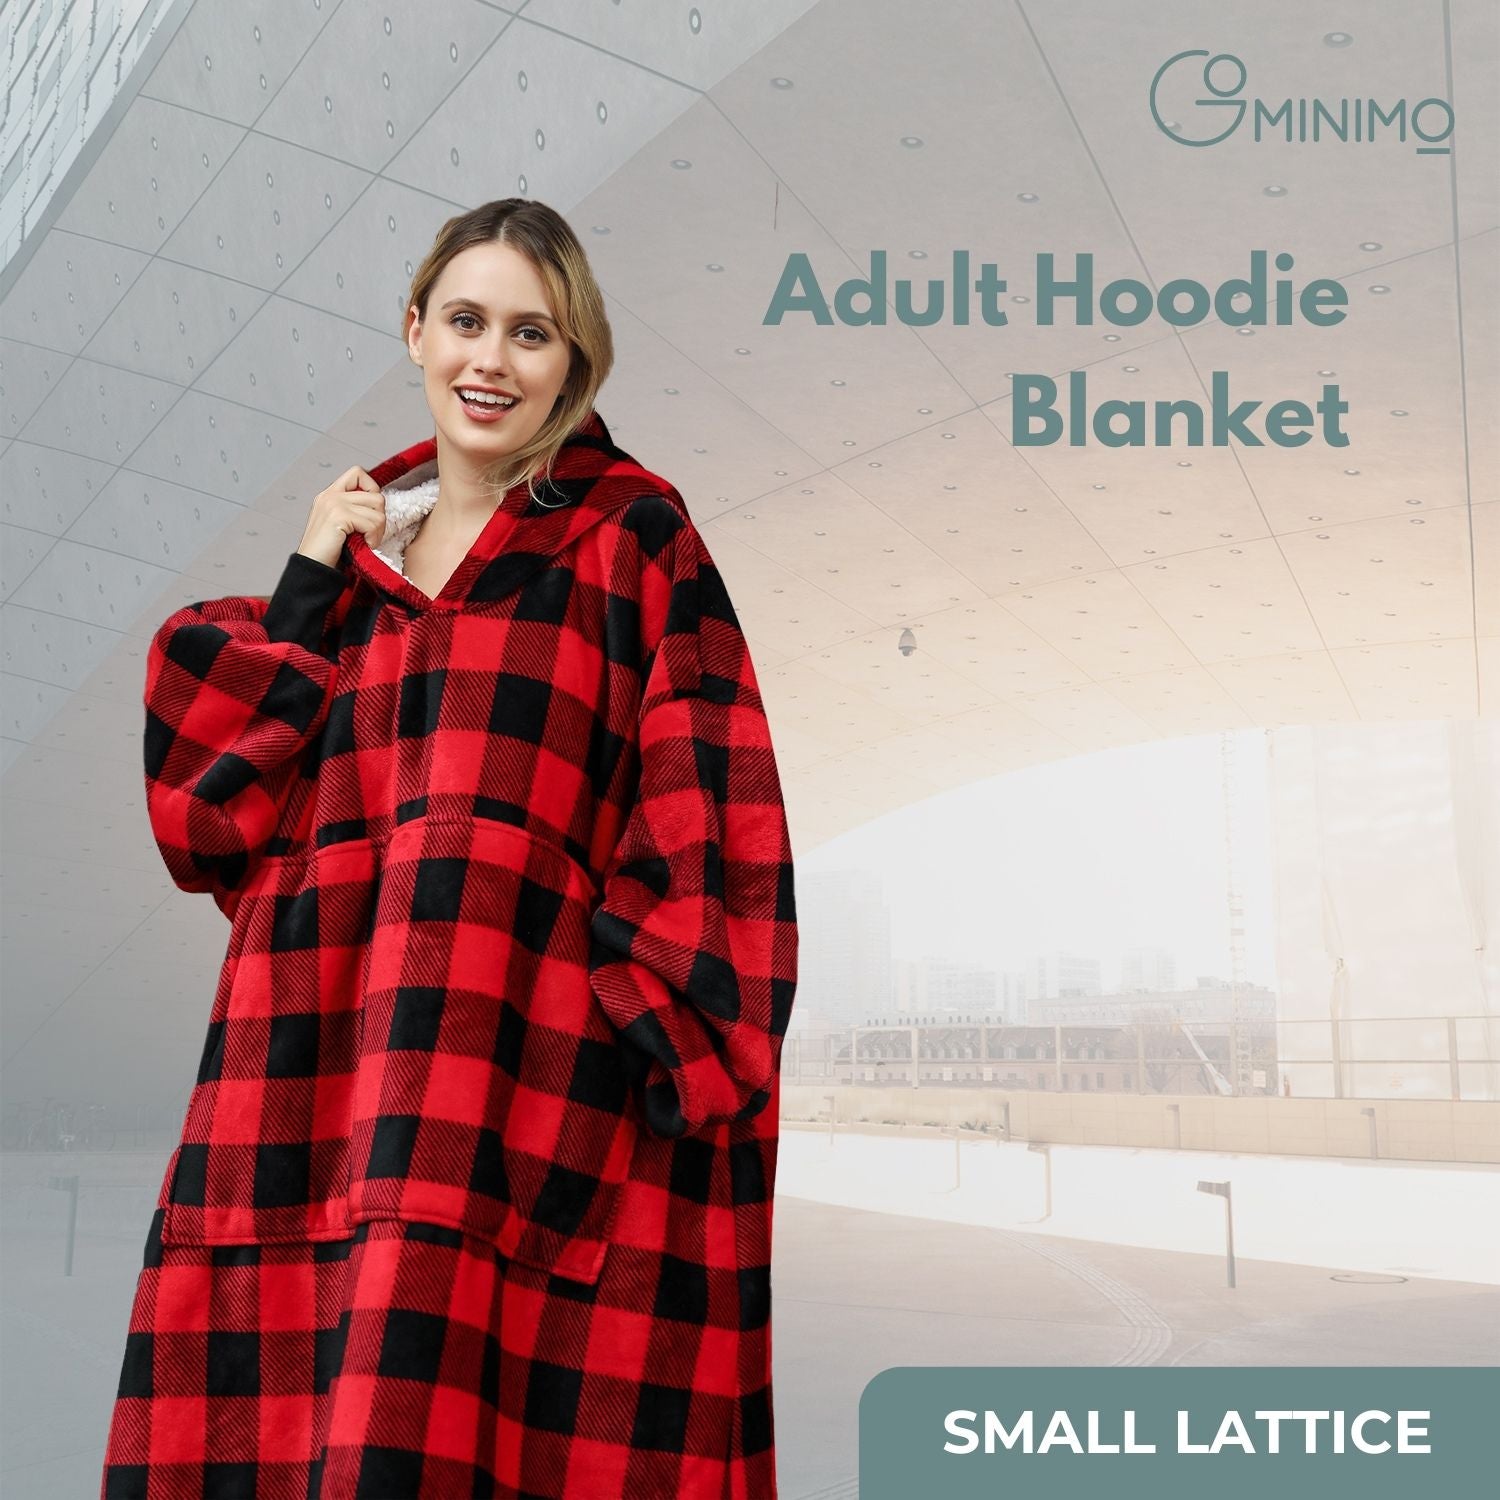 GOMINIMO Hoodie Blanket Adult Small Lattice GO-HB-130-AYS from Deals499 at Deals499